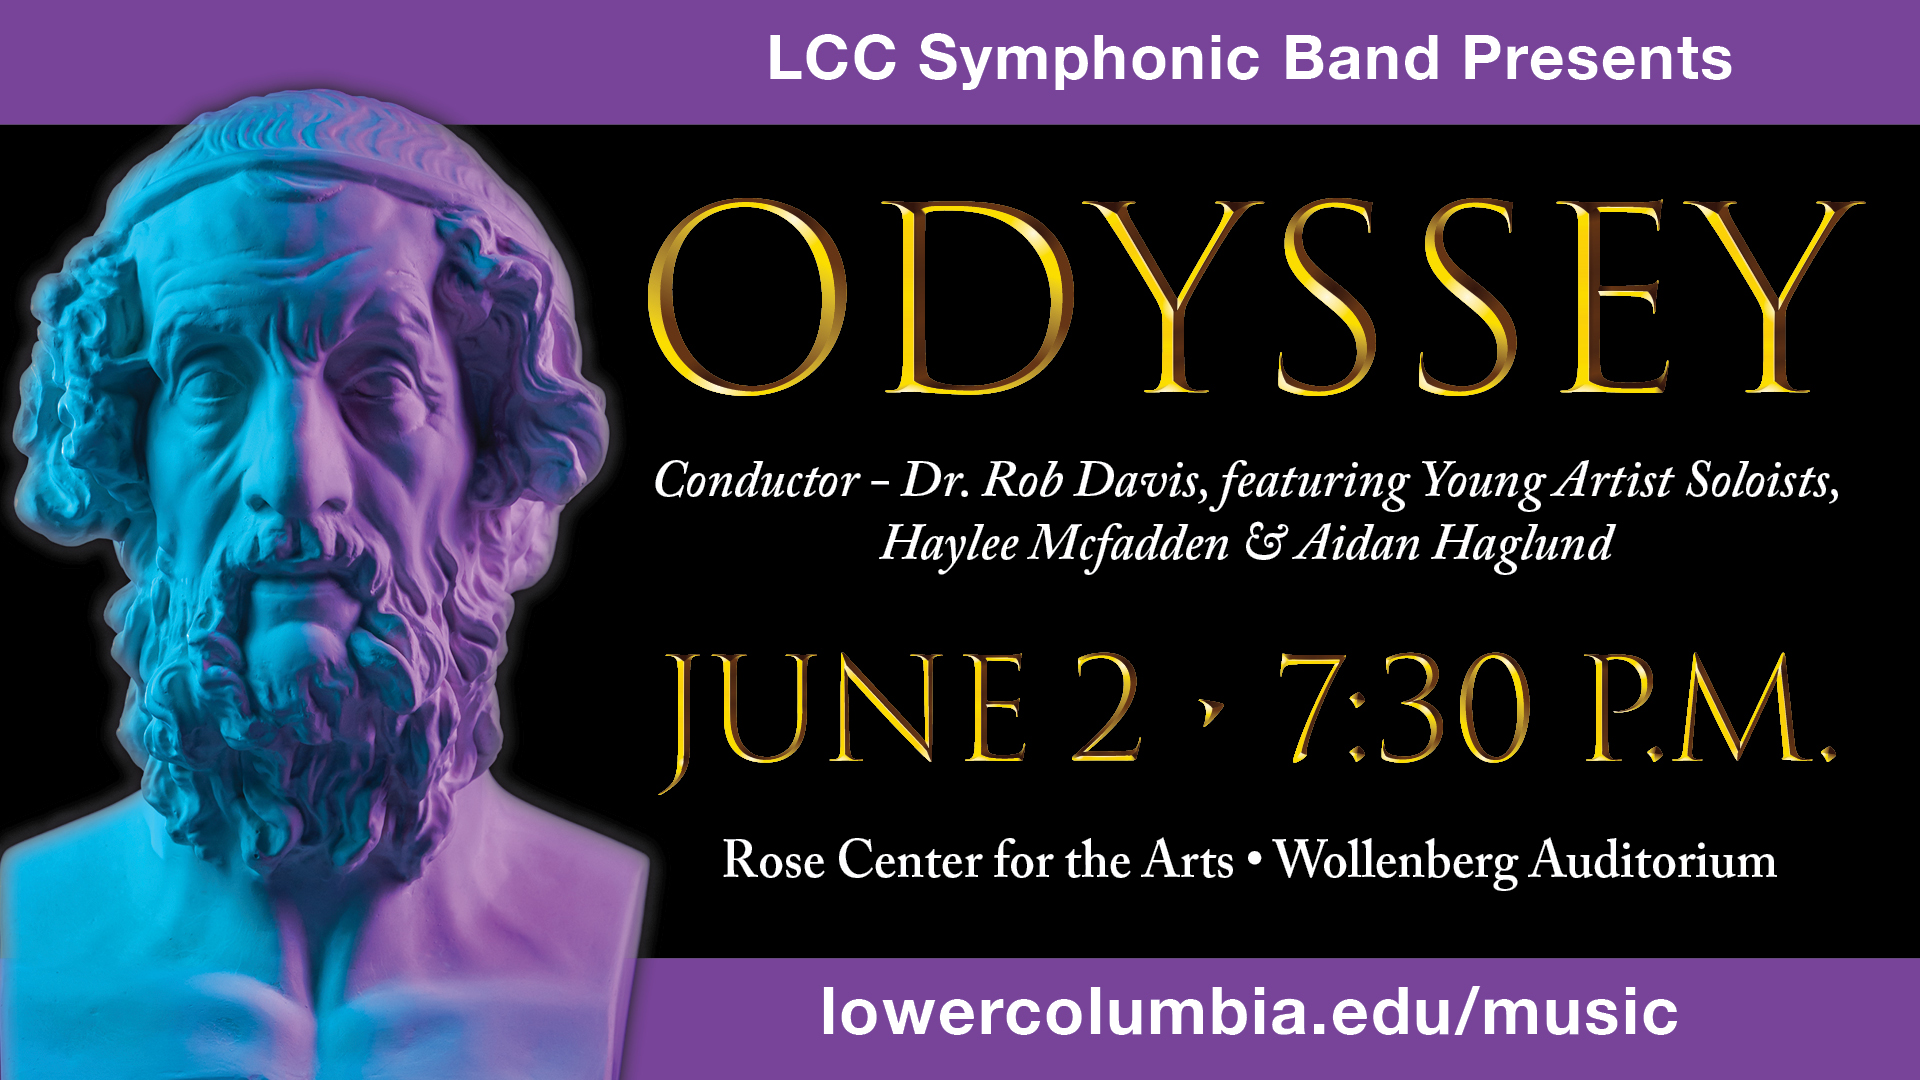 purple board with black center background. Stone bust of elderly man with a beard. Text that reads "LCC symphonic band presents; ODYSSEY; Conductor Dr. Rob Davis, featuring Young Artist Soloist, Haylee Mcfadden and Aidan Haglund; June 2 at 7:30PM; Rose Center for the Arts -Wollenberg Auditorium"